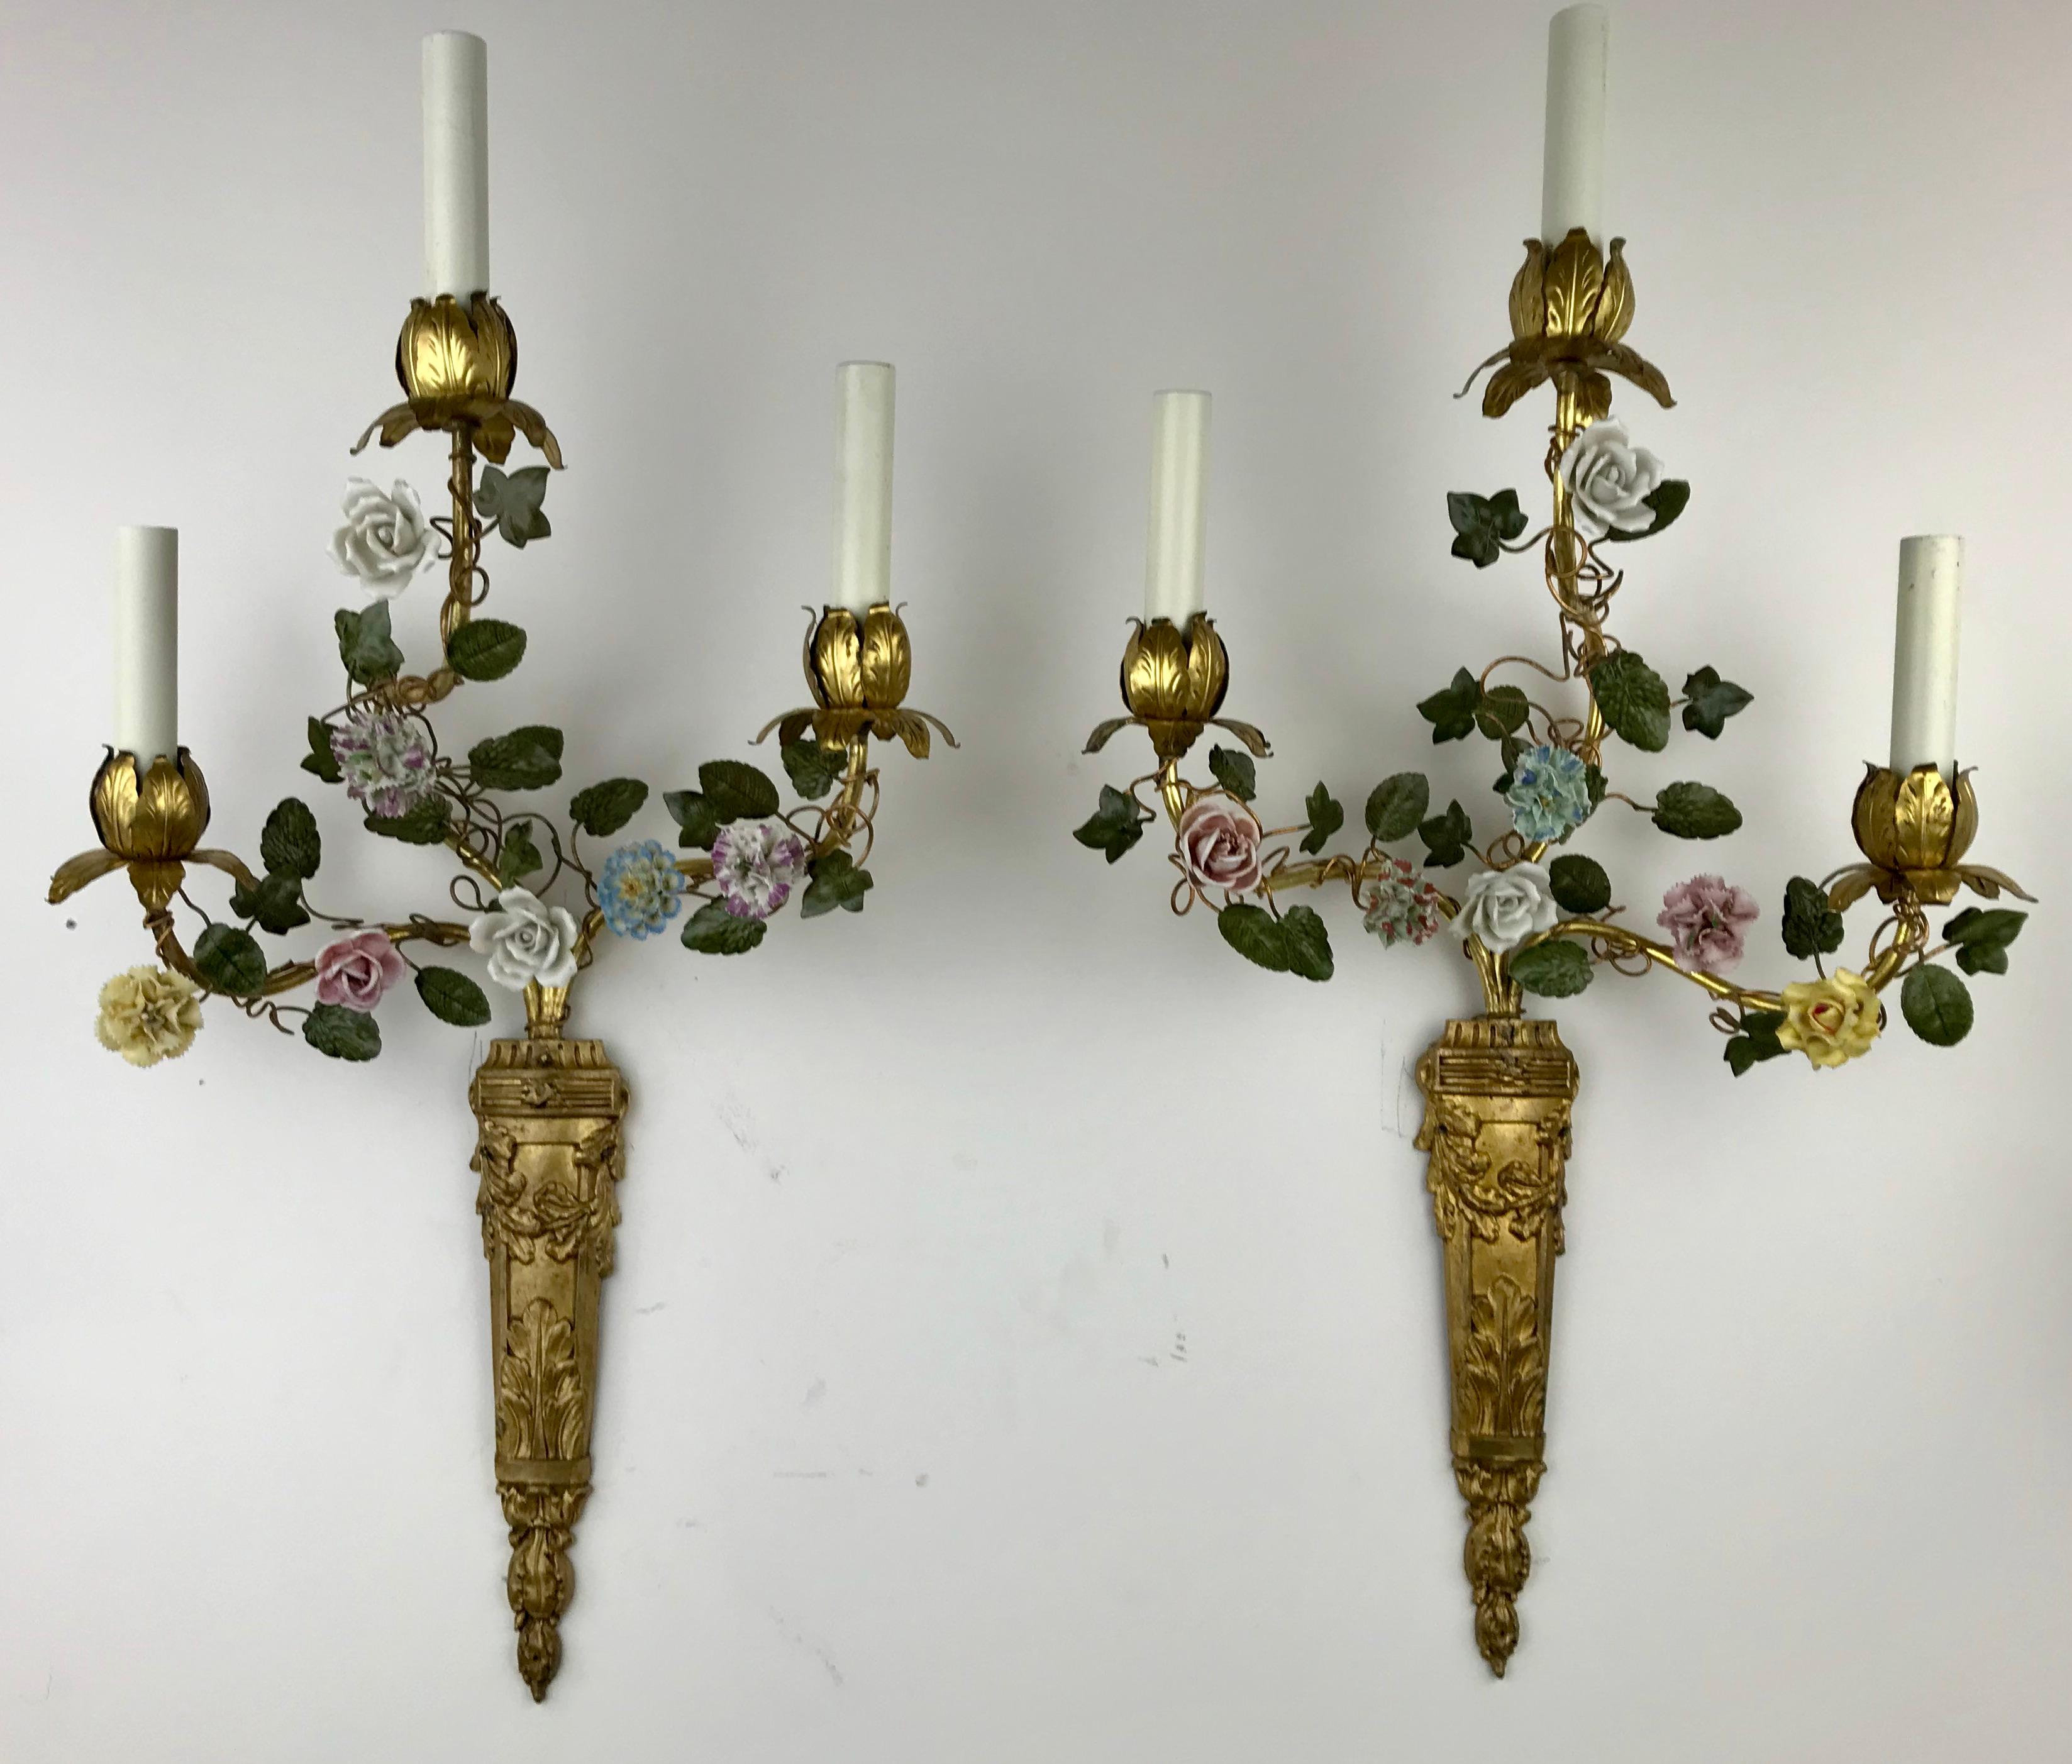 This beautiful pair of French three arm sconces feature naturalistic foliate branches with hand painted porcelain flowers.